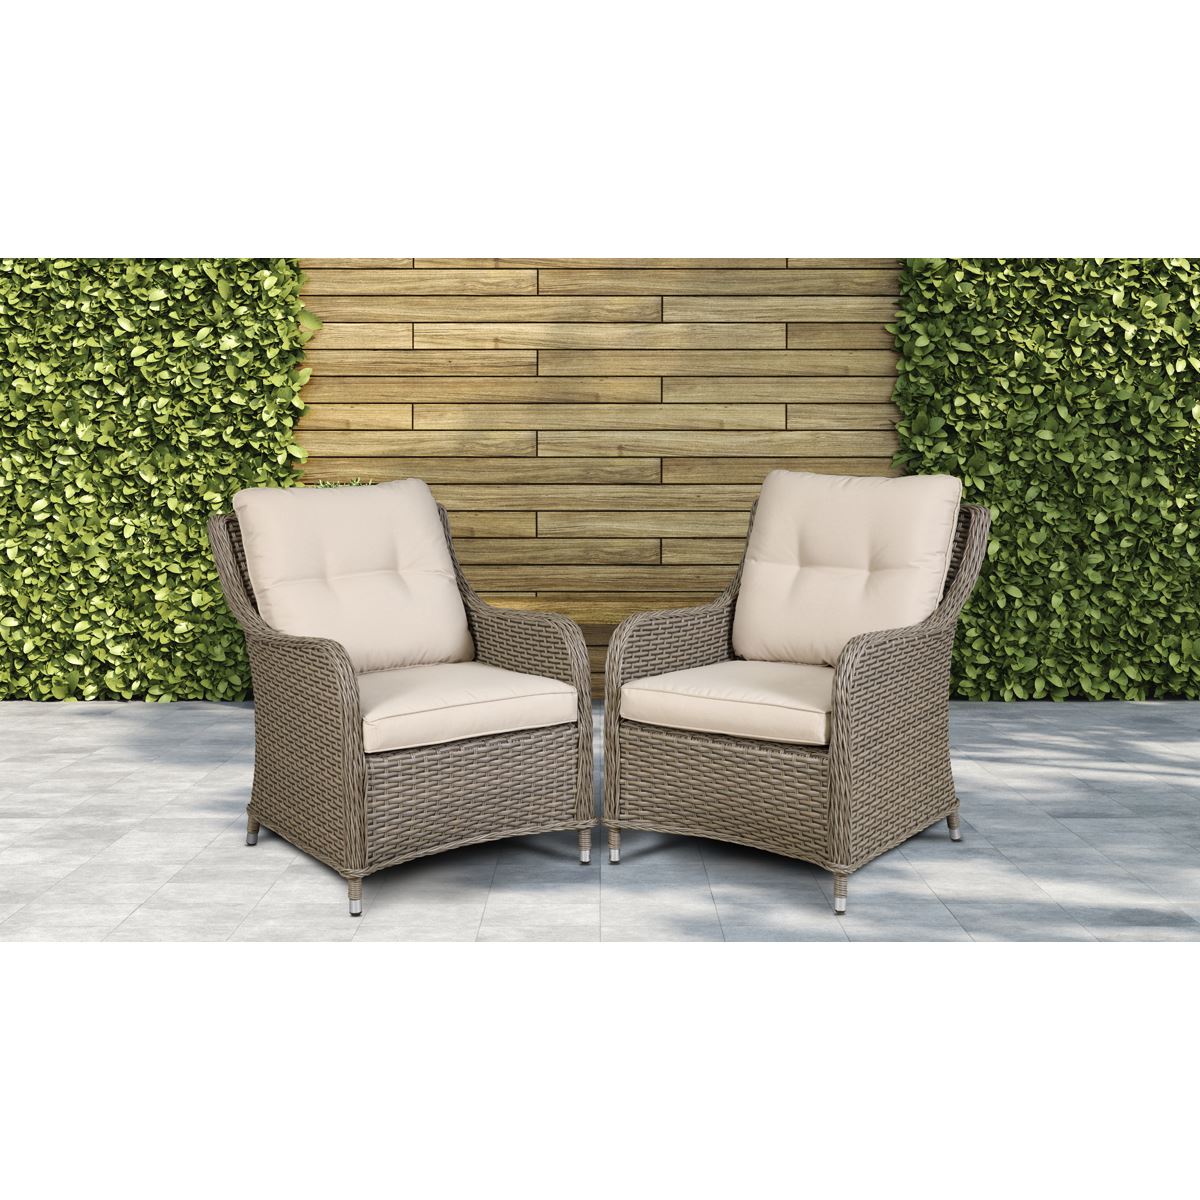 Dellonda Chester Rattan Wicker Outdoor Lounge Chairs with Cushion, Brown